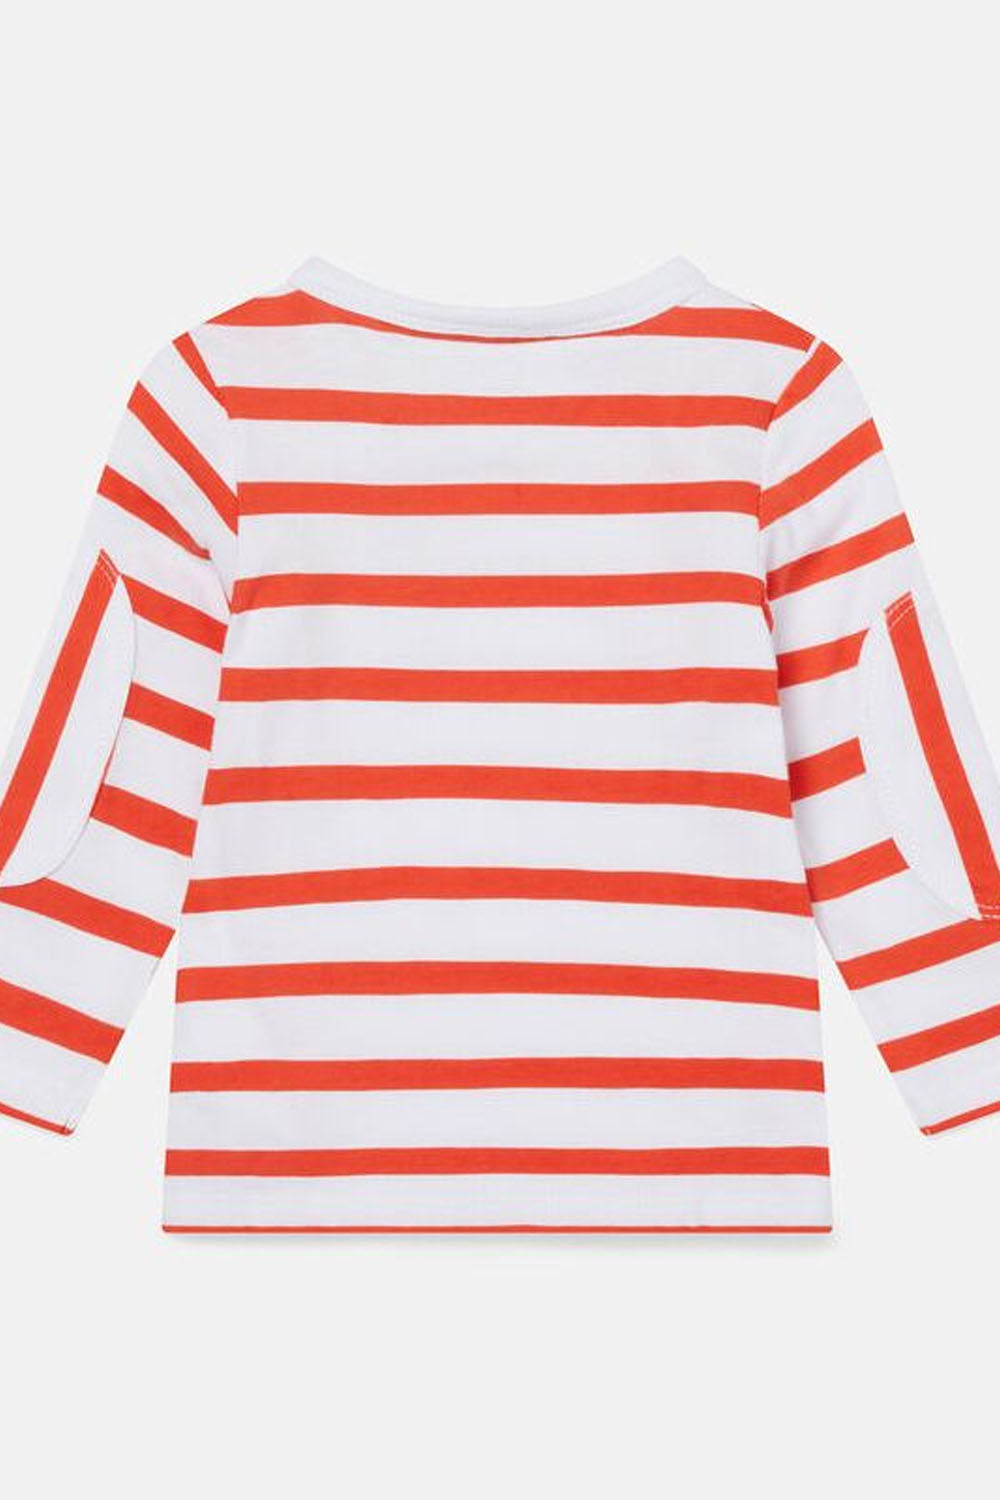 Striped Jersey T-Shirt W/Badge for Boys